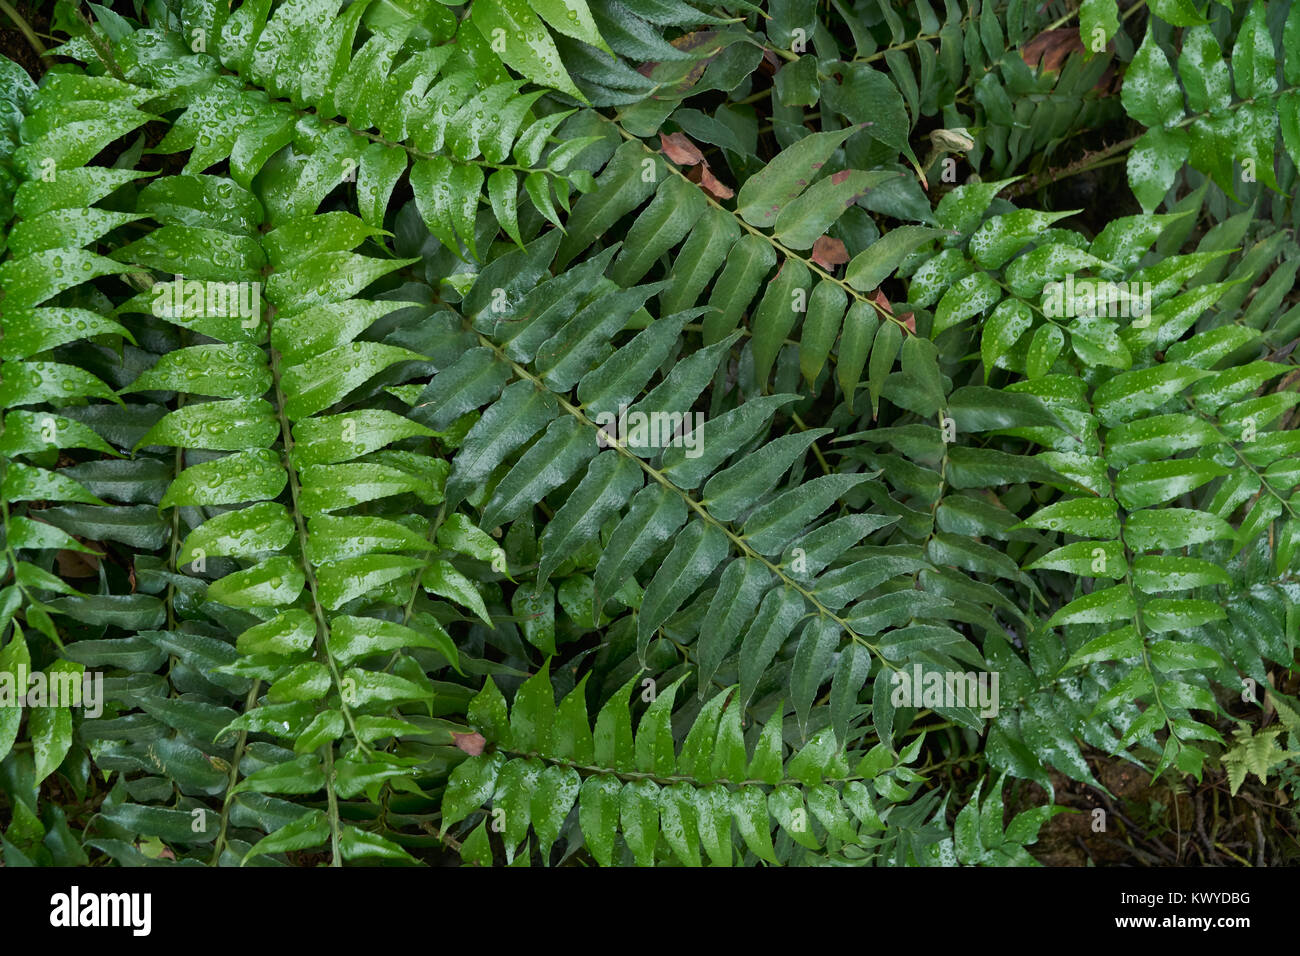 Nephrolepis exaltata, a species of fern in the family Lomariopsidaceae. It is also called as the sword fern. Stock Photo